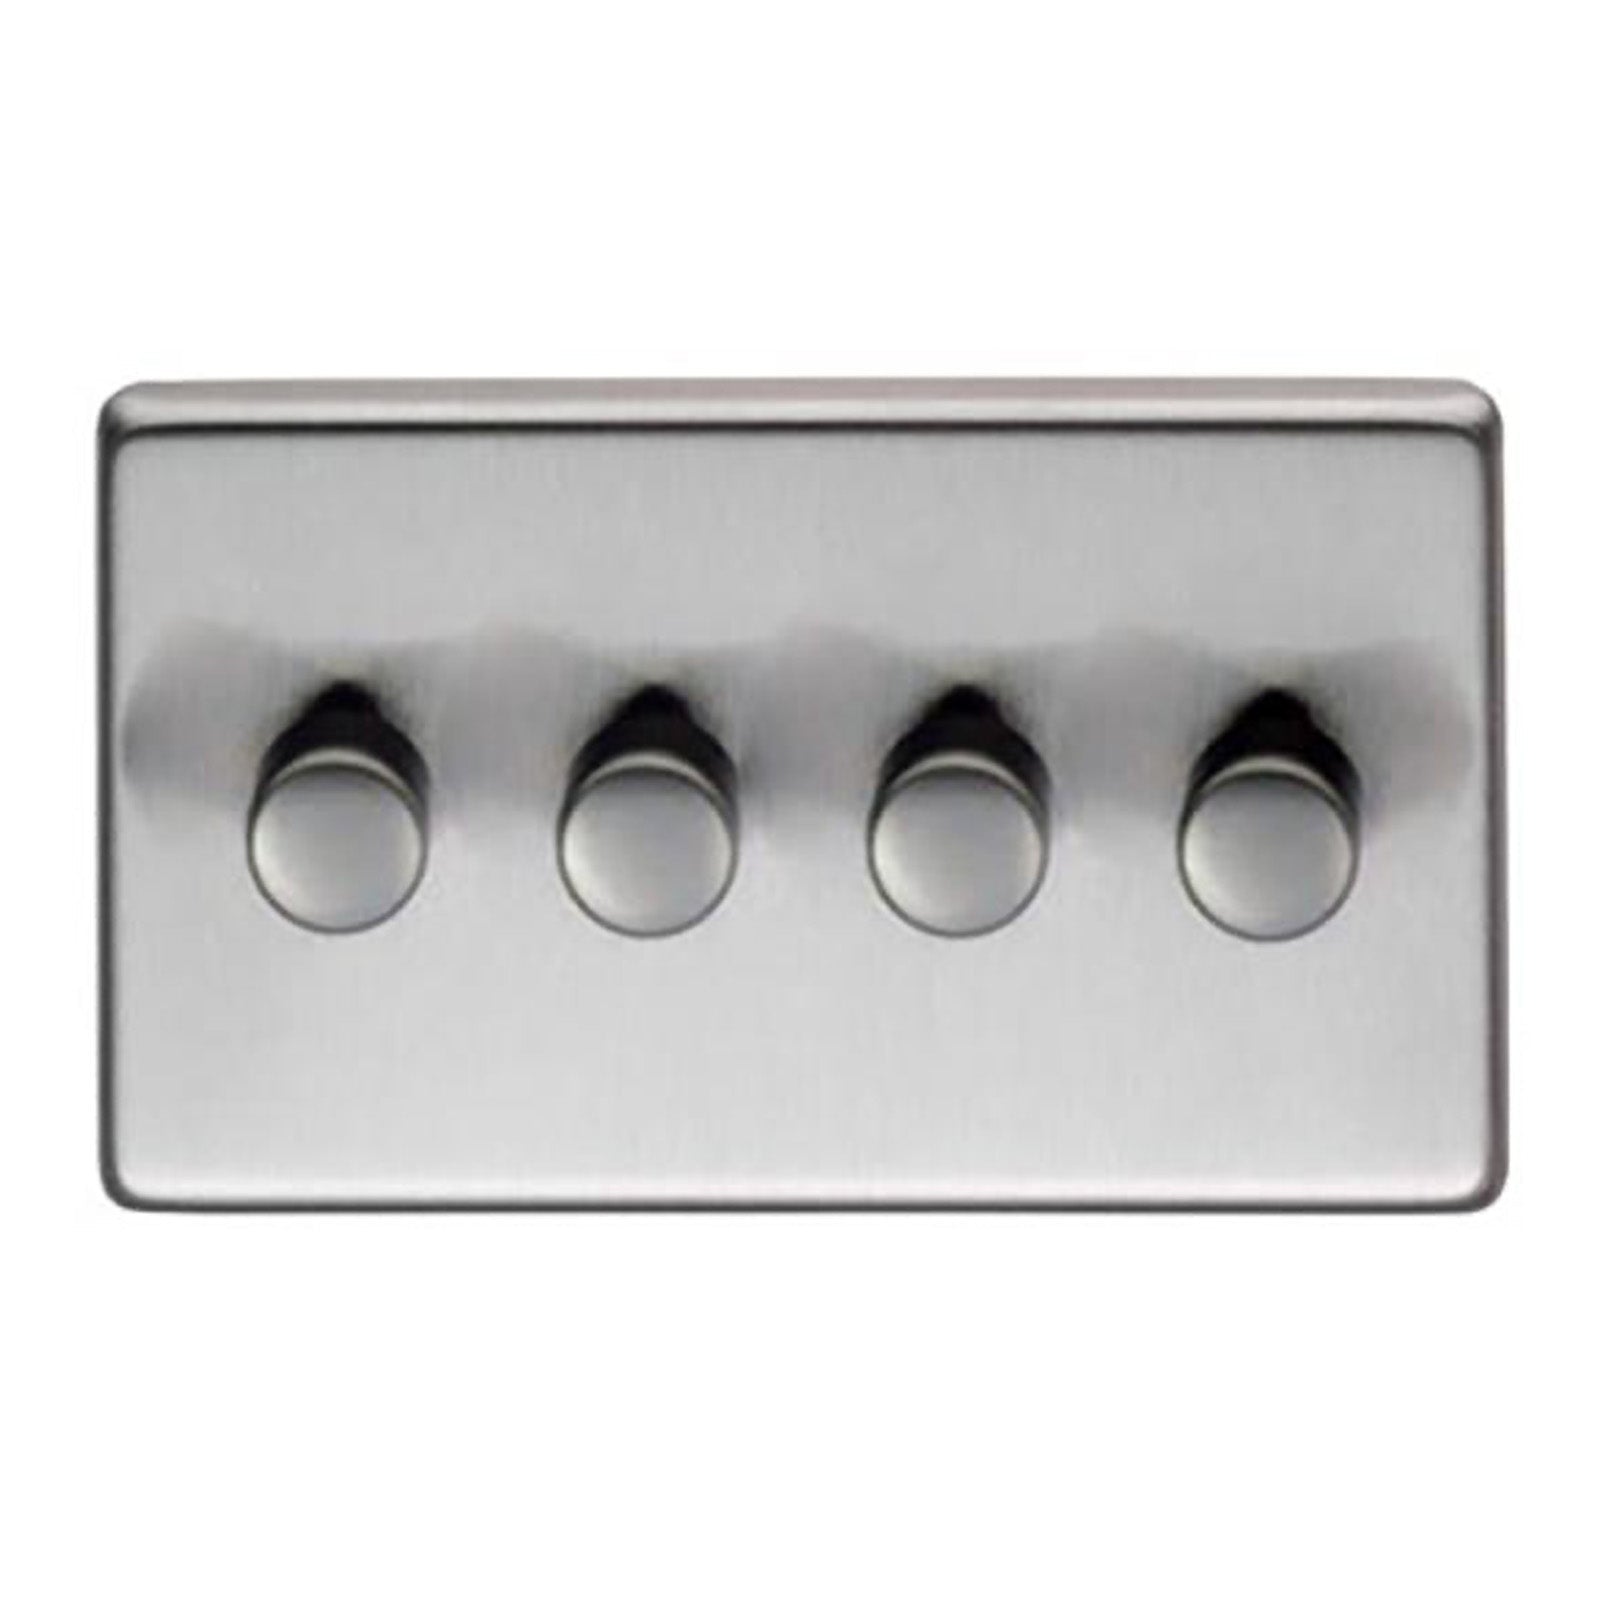 SHOW Image of Quad LED Dimmer Switch with Satin Stainless Steel finish